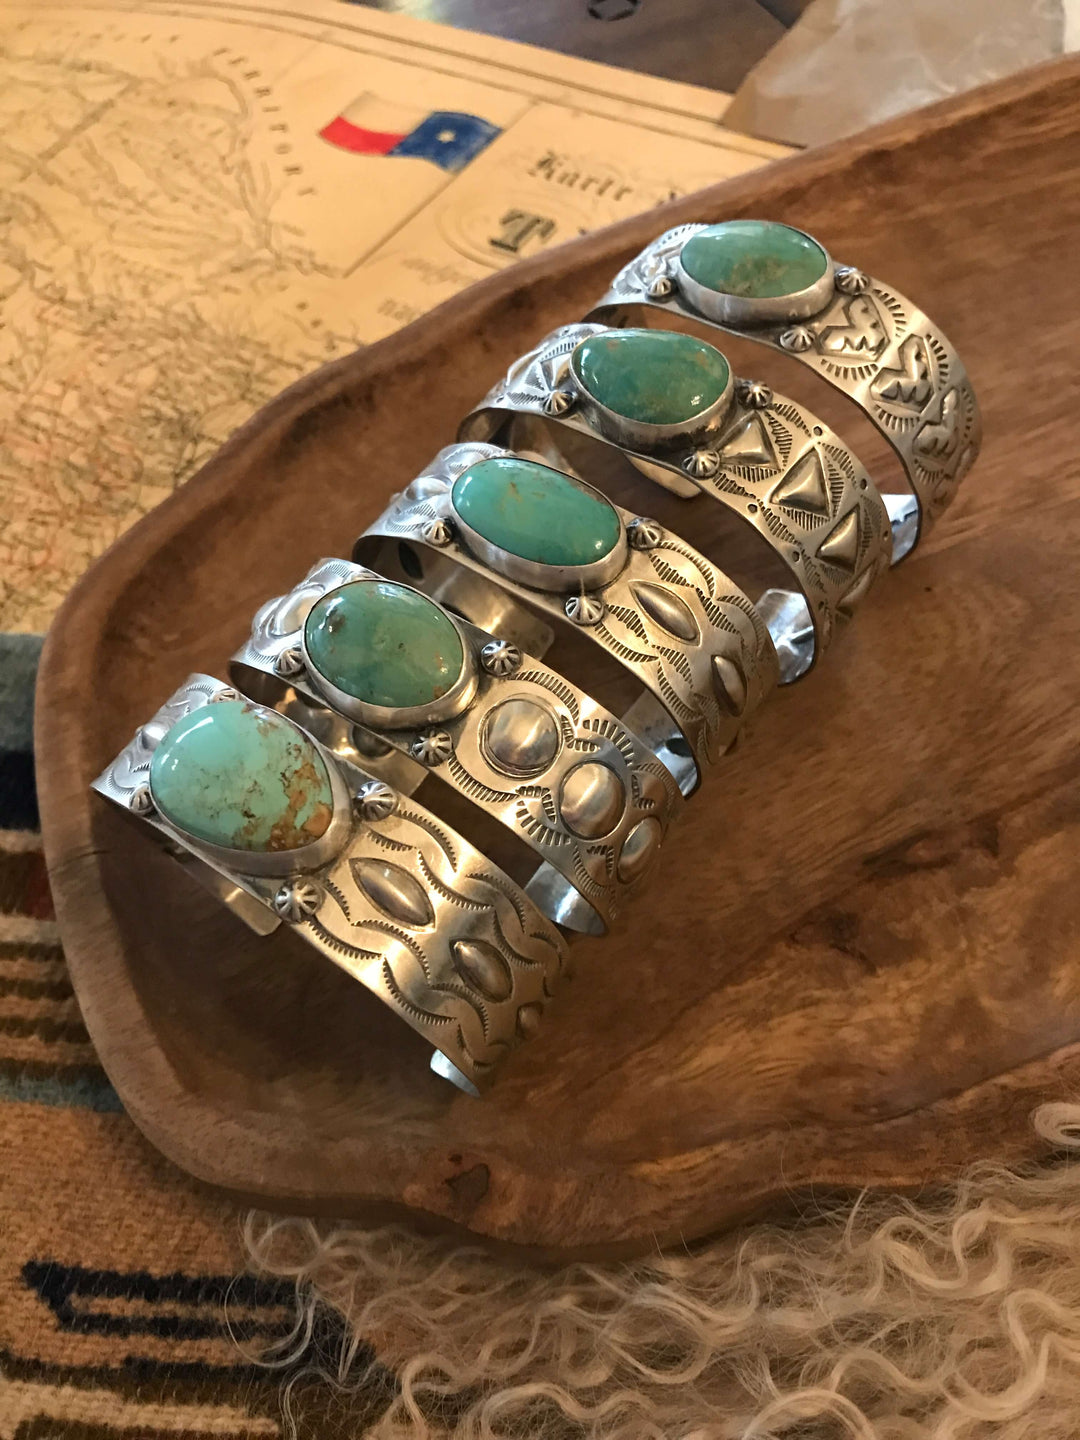 The Copeland Turquoise Cuffs-Bracelets & Cuffs-Calli Co., Turquoise and Silver Jewelry, Native American Handmade, Zuni Tribe, Navajo Tribe, Brock Texas